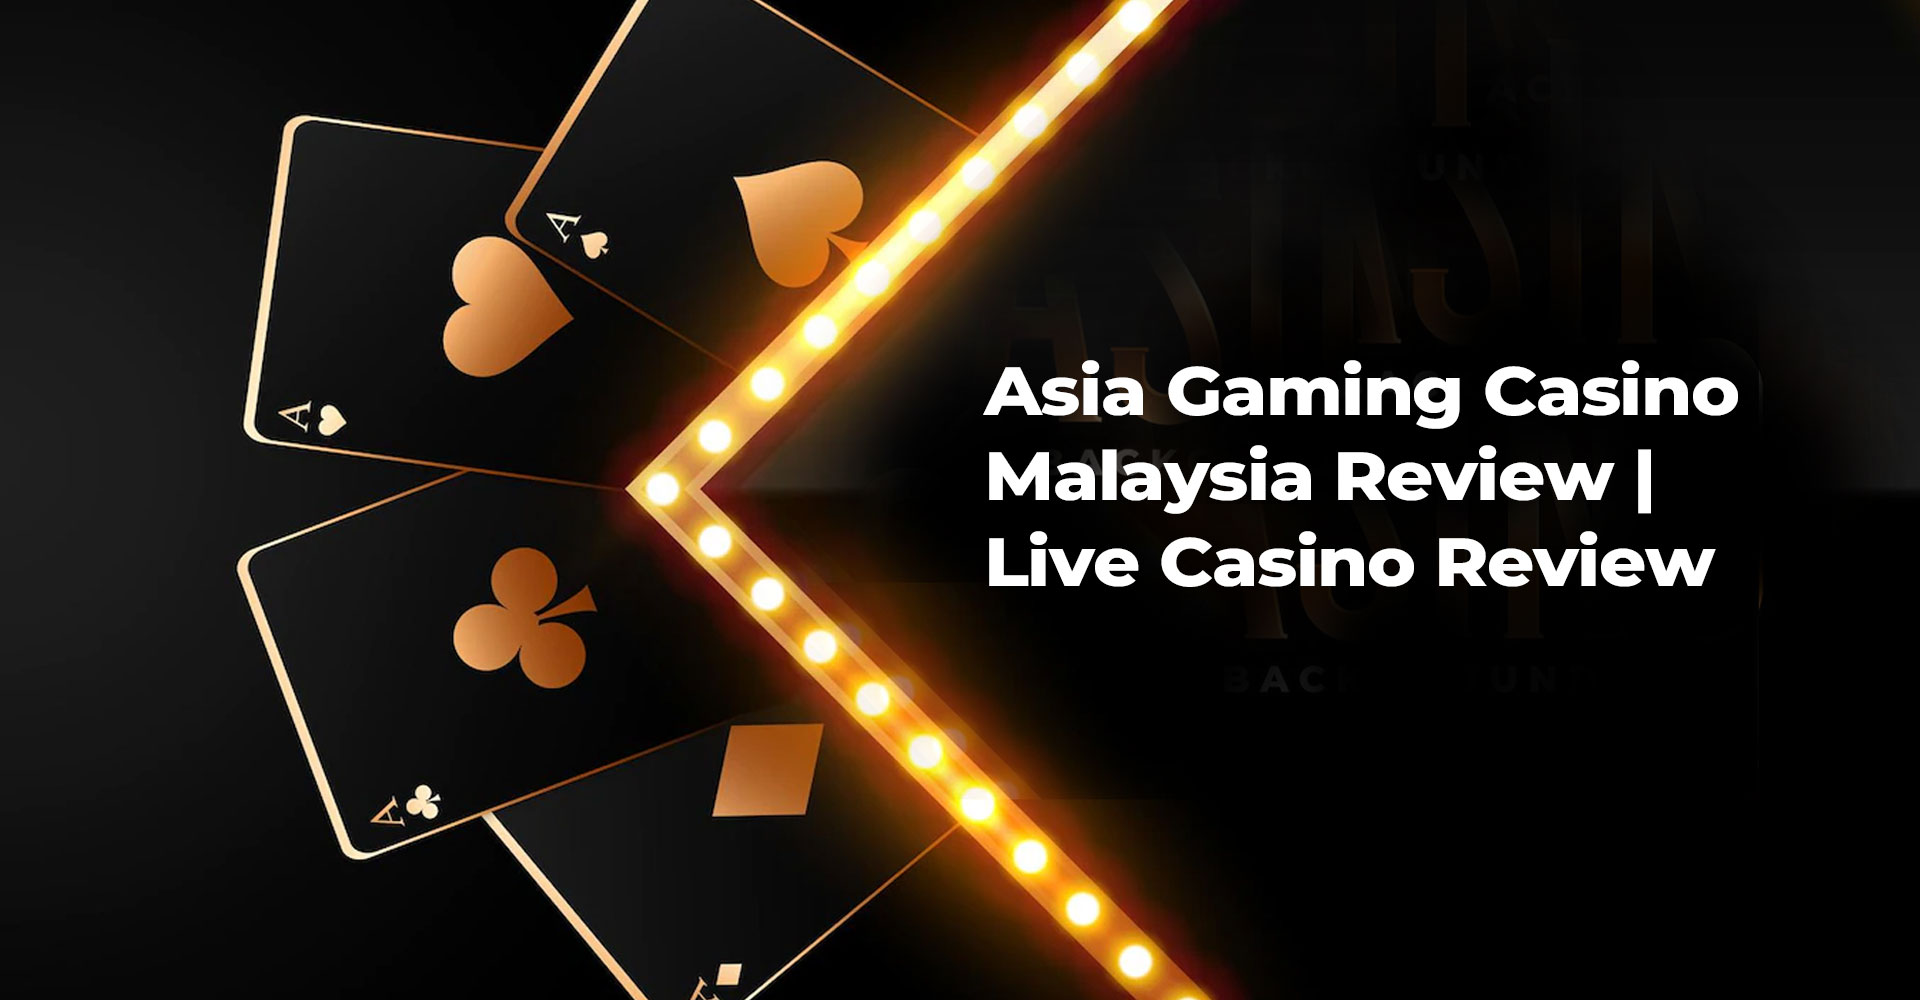 Asia Gaming Casino Malaysia Review | Asian Live Gaming Review